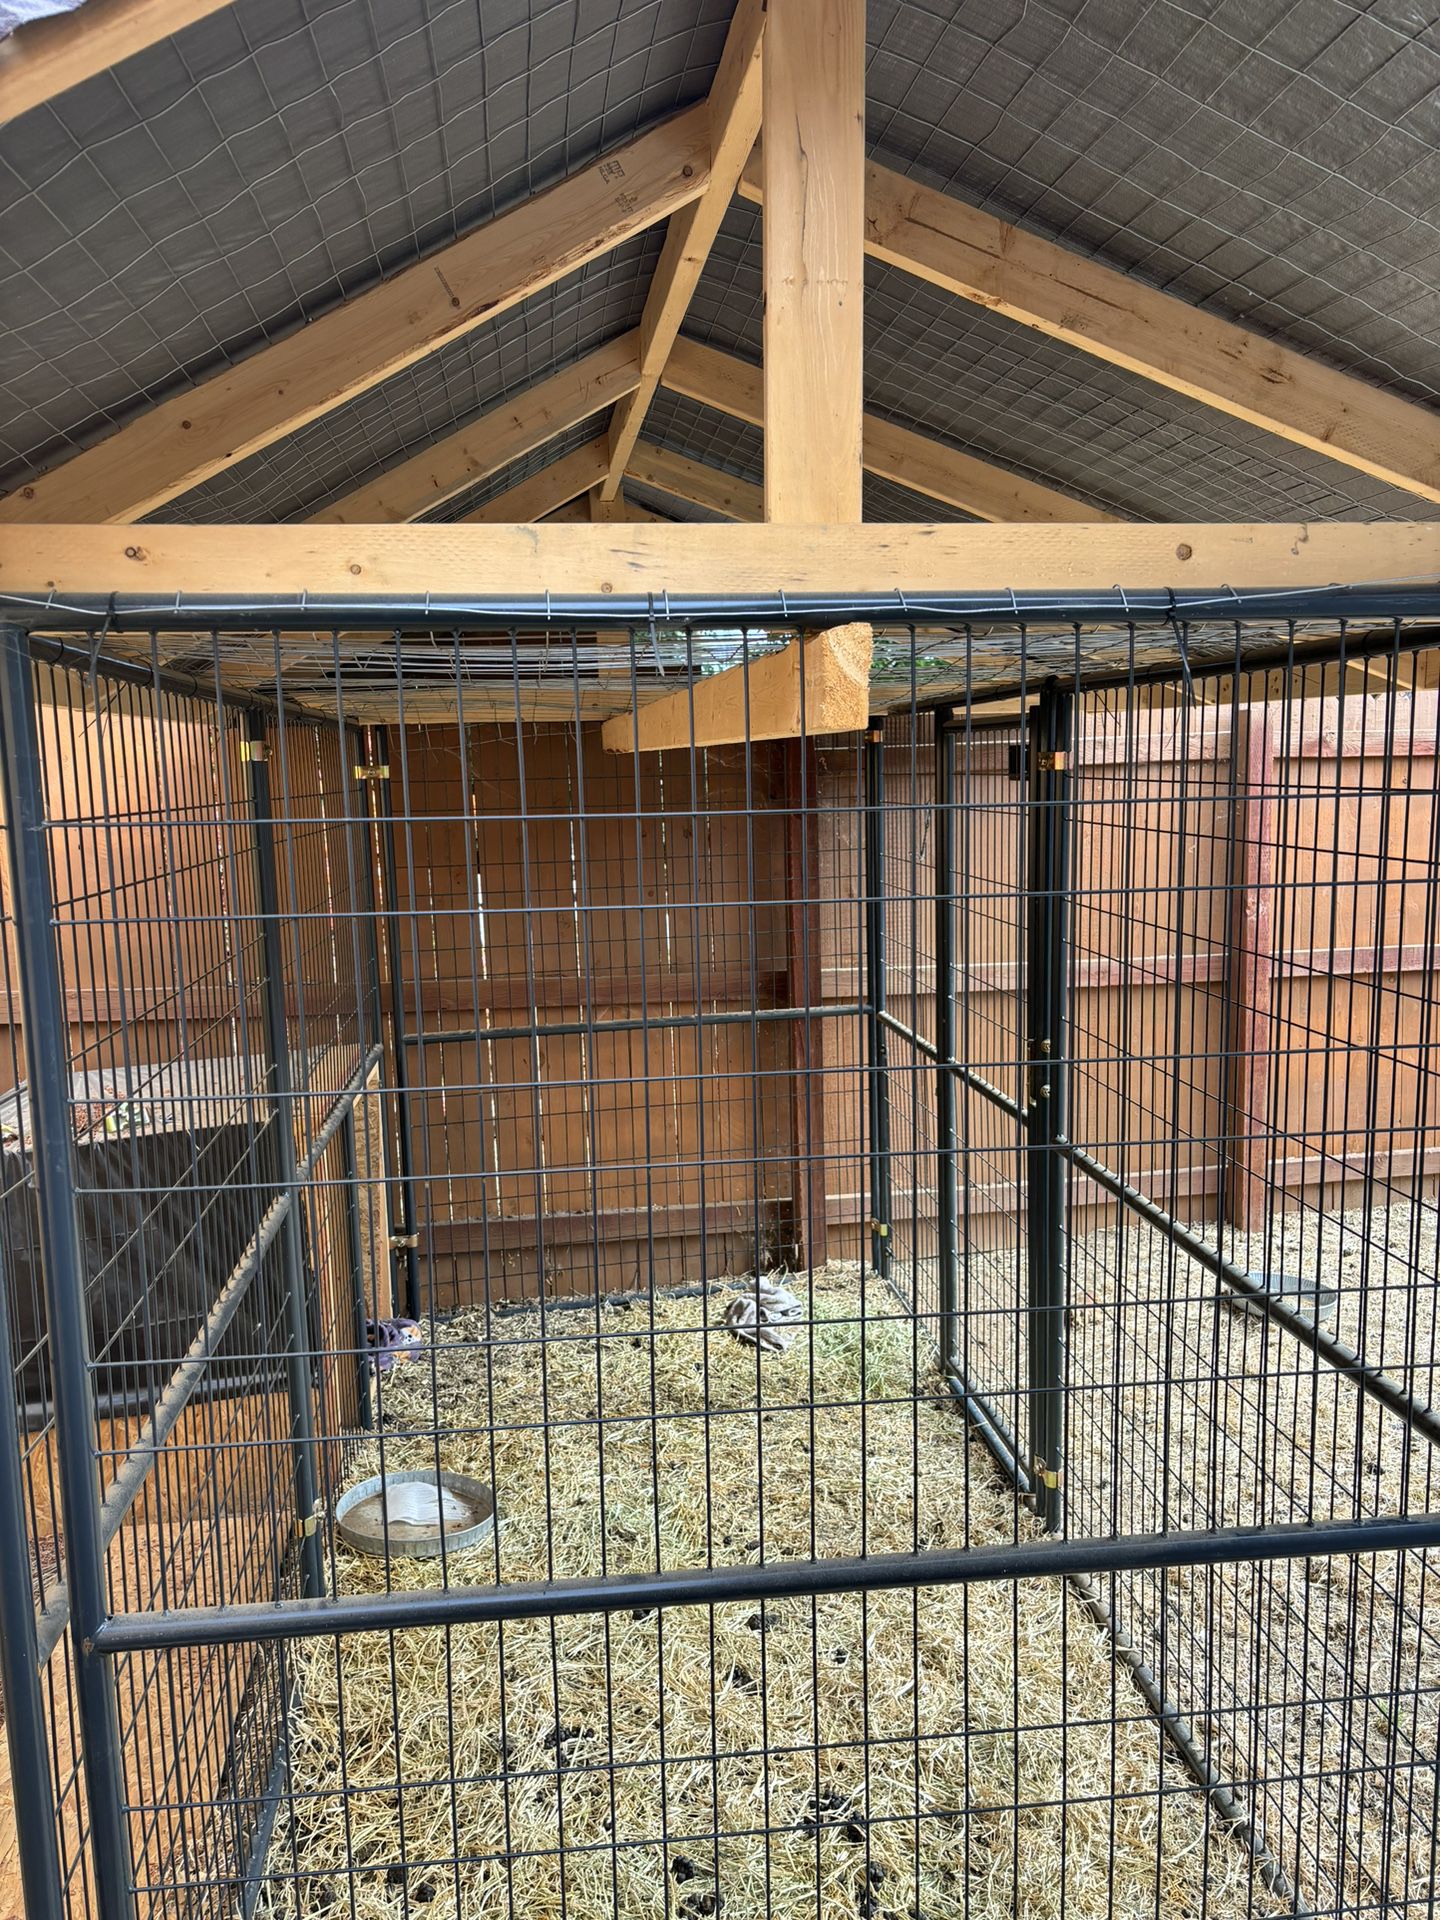 LiveStock / Chicken / Goat / Dog Run / Cage penn ROOF INCLUDED